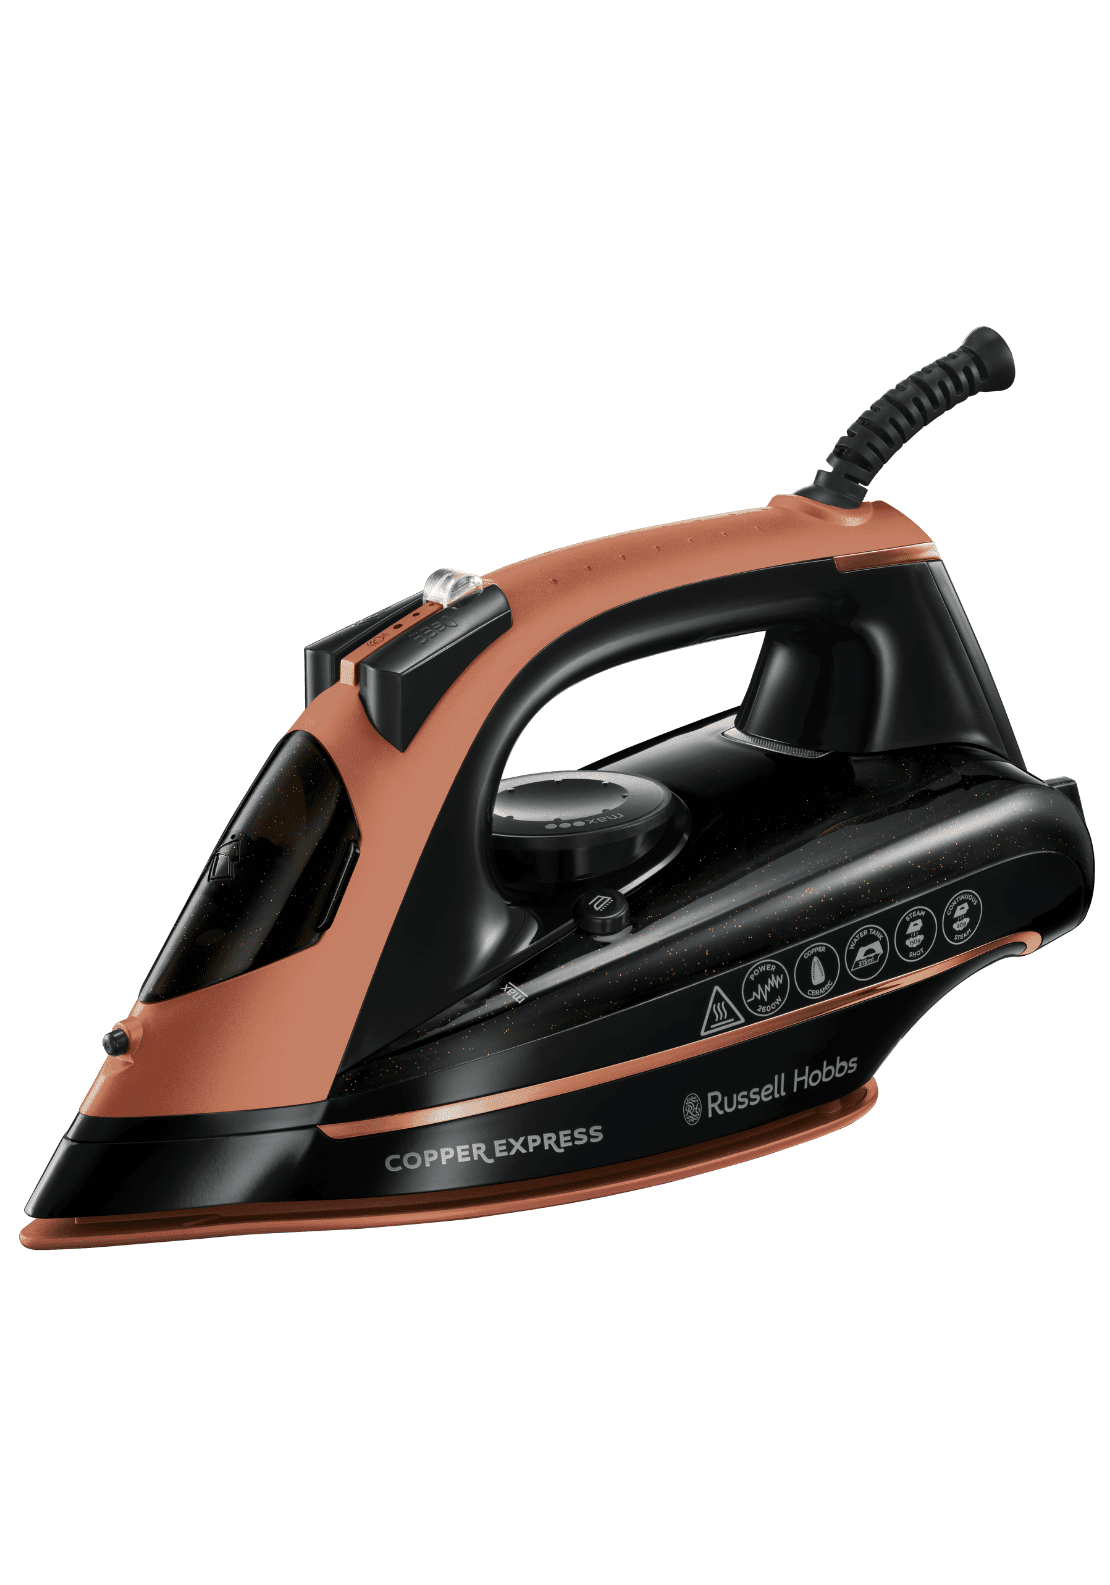 Russell Hobbs Copper Express Iron 1 Shaws Department Stores